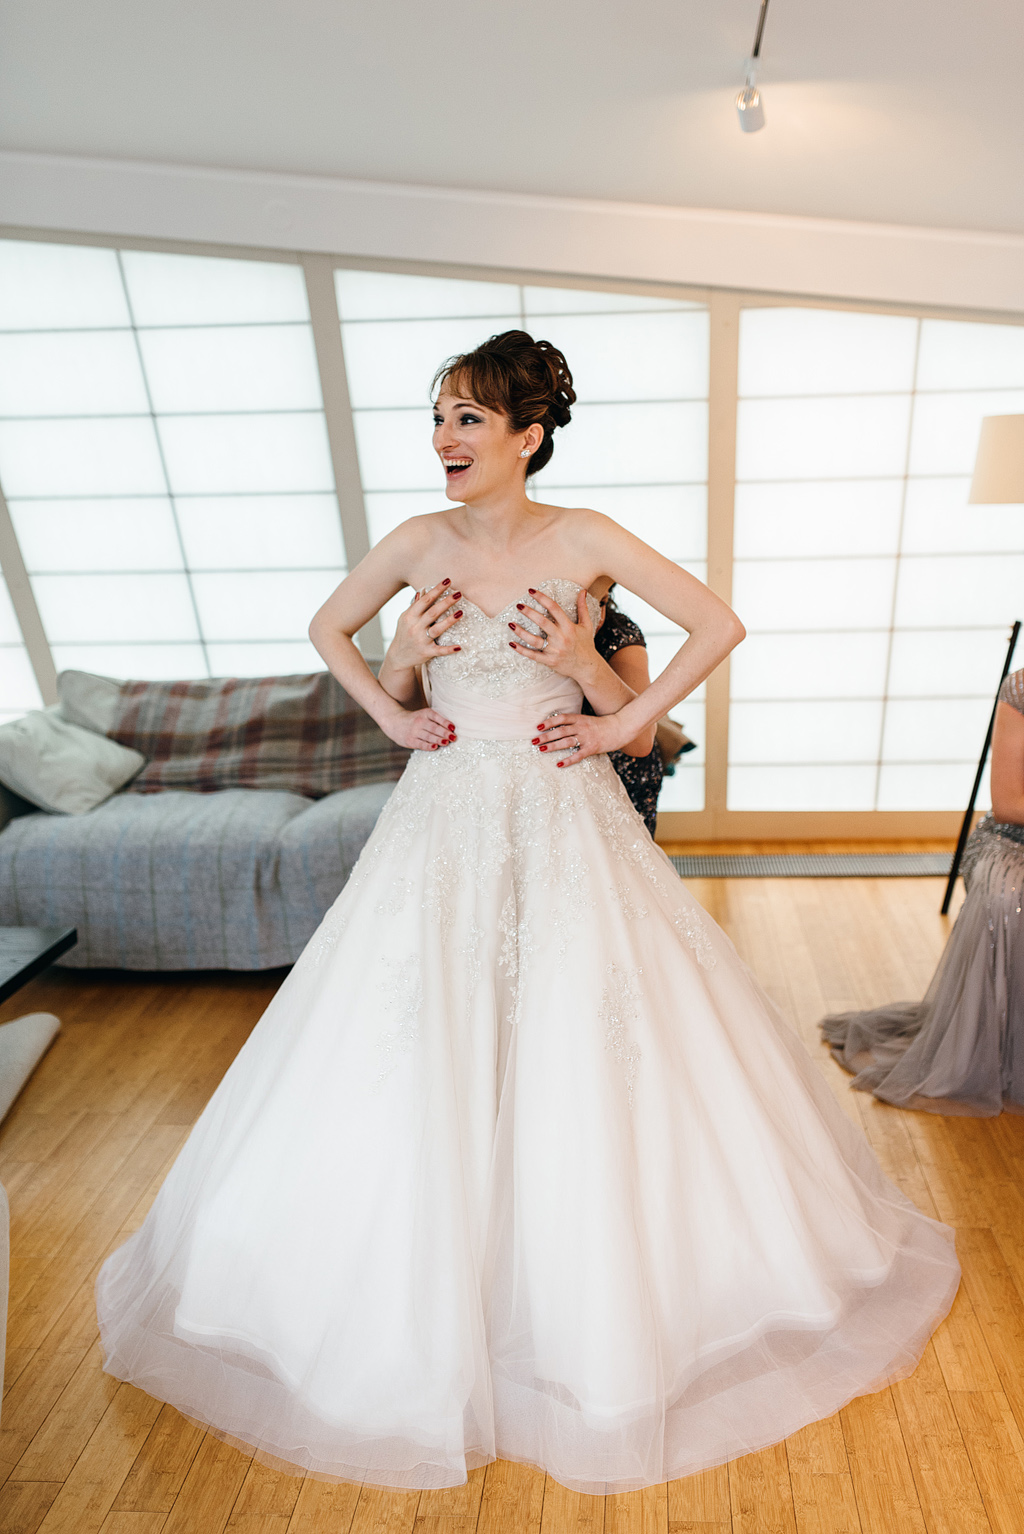 Bride laughing while getting into wedding dress